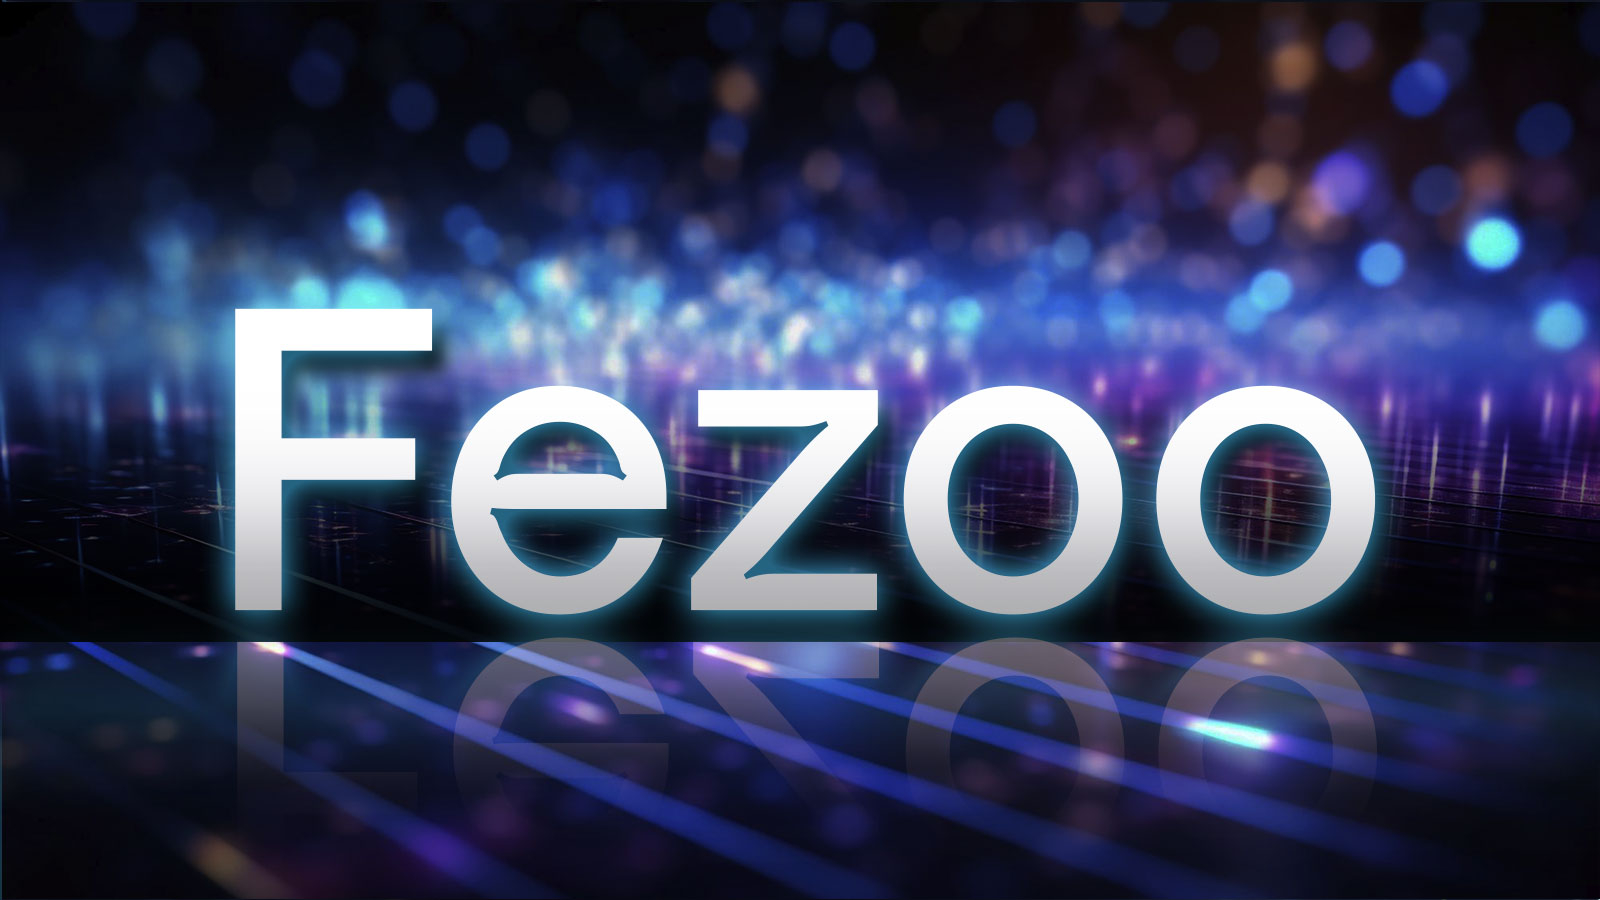 Fezoo (FEZ) Early Token Sale Might be On-Boarding New Customers in March as U.S. Dollar Tether (USDT), Binance Coin (BNB) Top Altcoins Set Trading Volume Highs